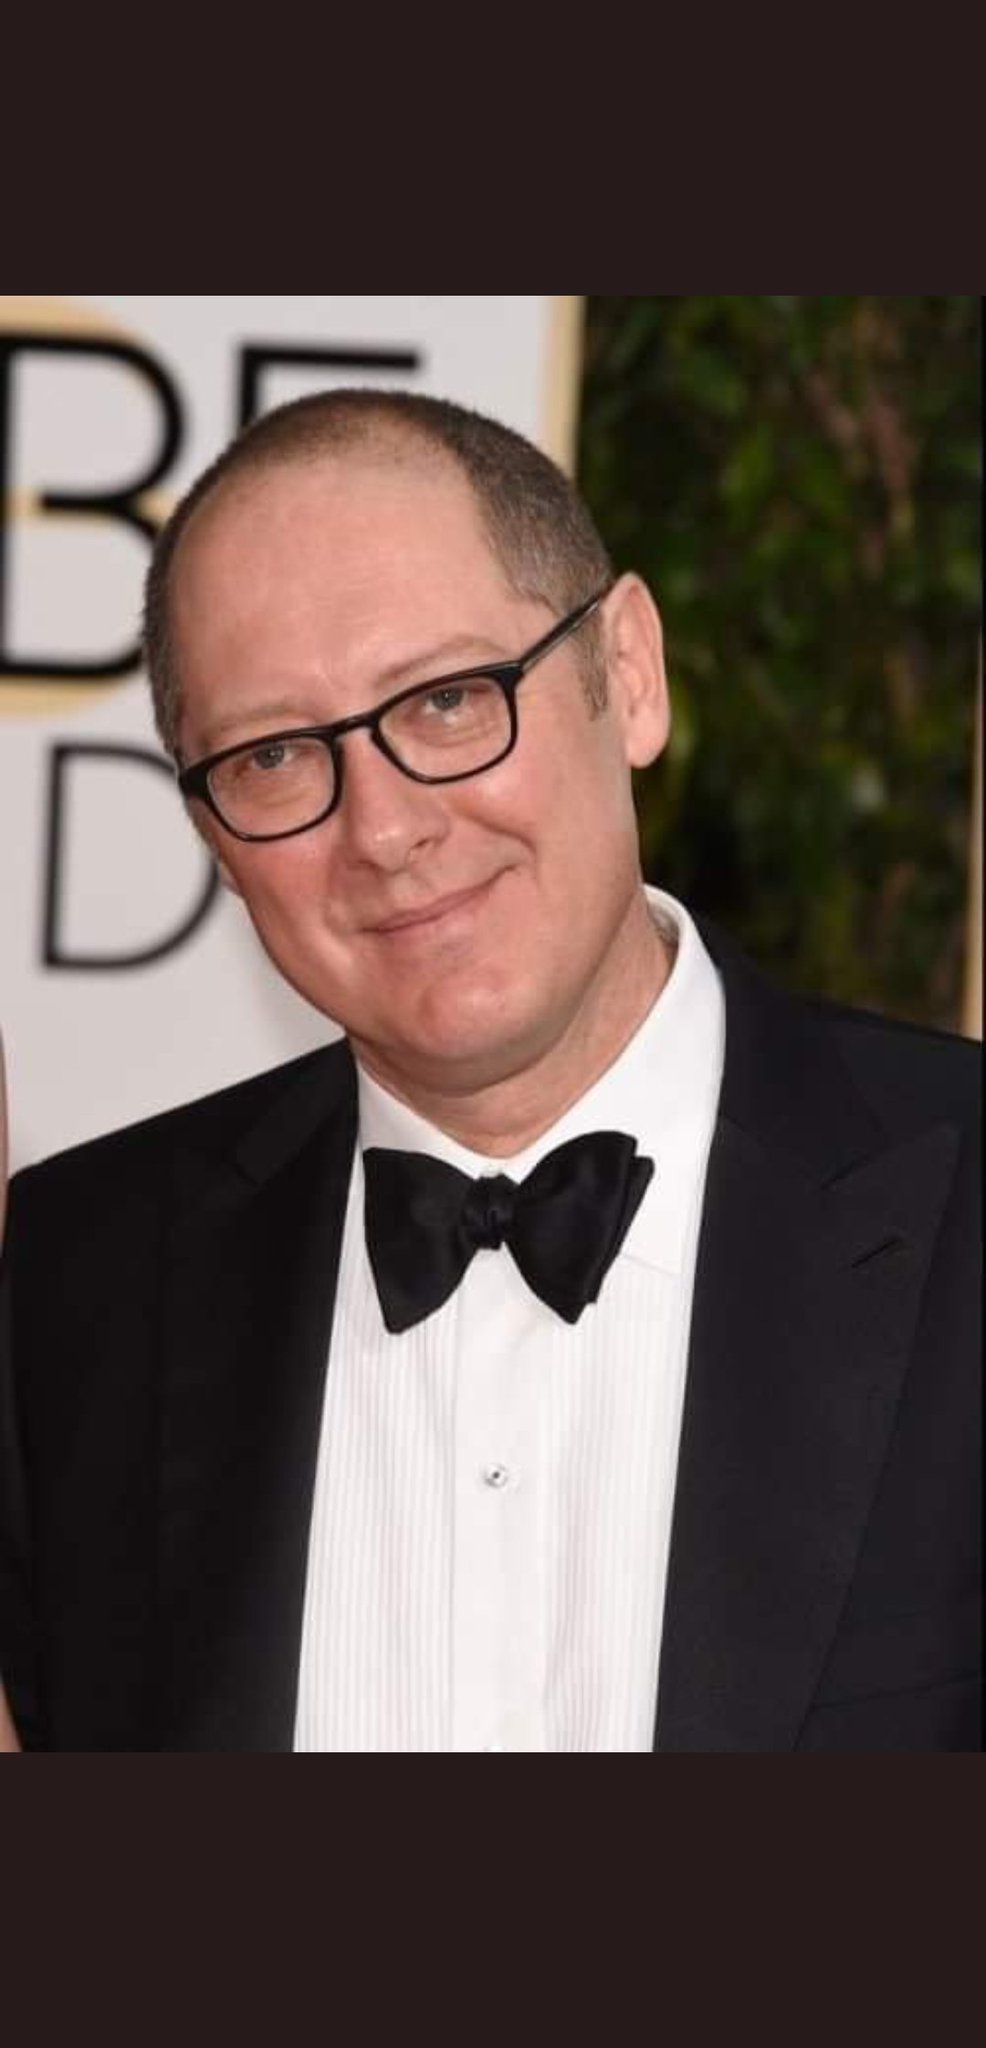 Happy birthday James Spader.   Love you as actor and a sympathetic, charismatic, humorous and sexy man   